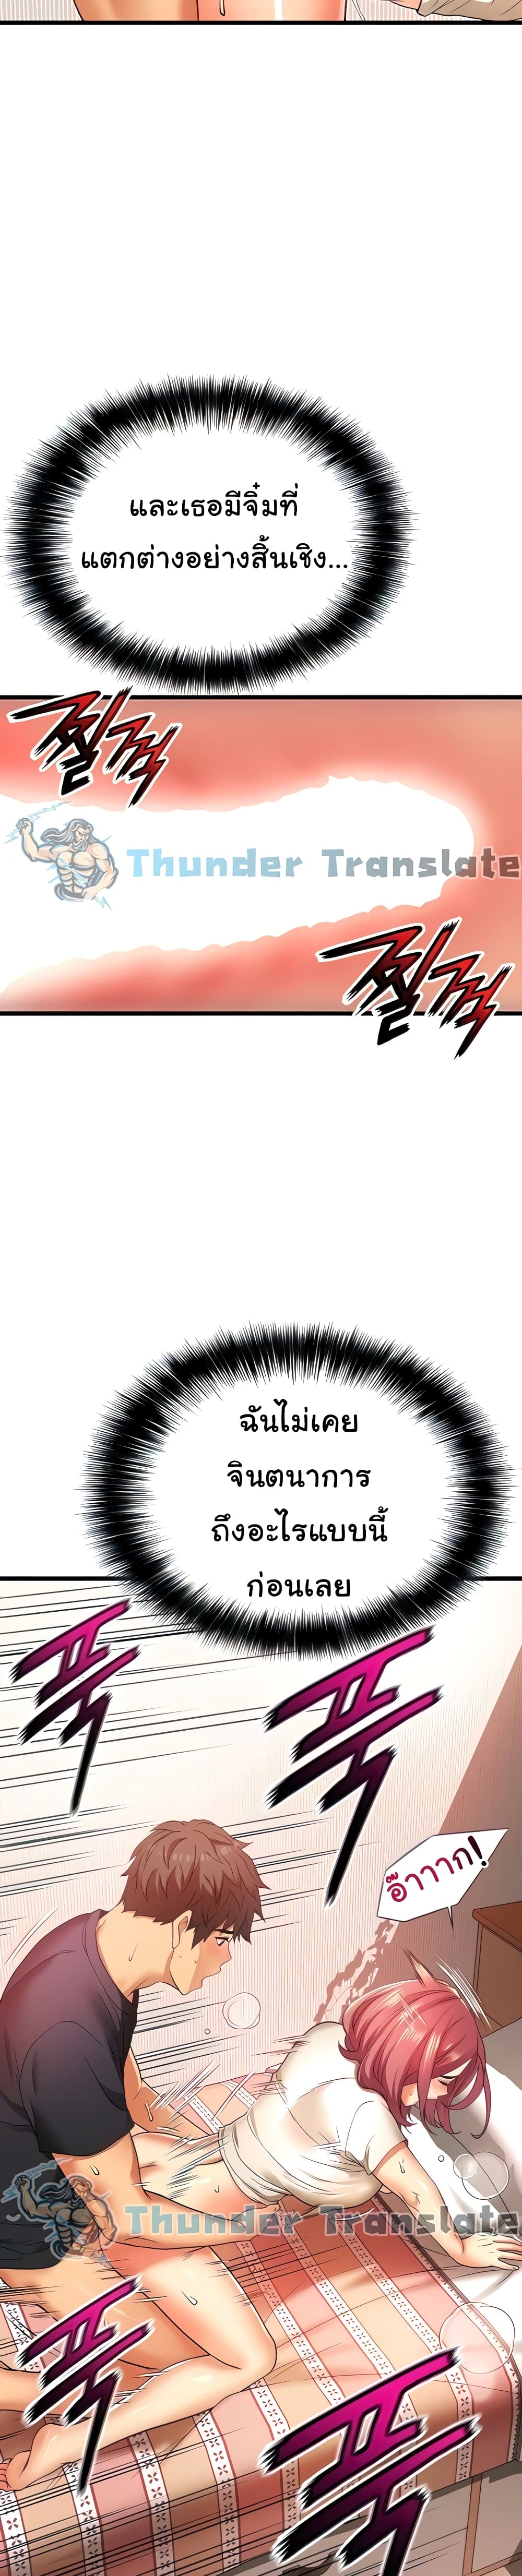 An Alley Story 5 ภาพที่ 12